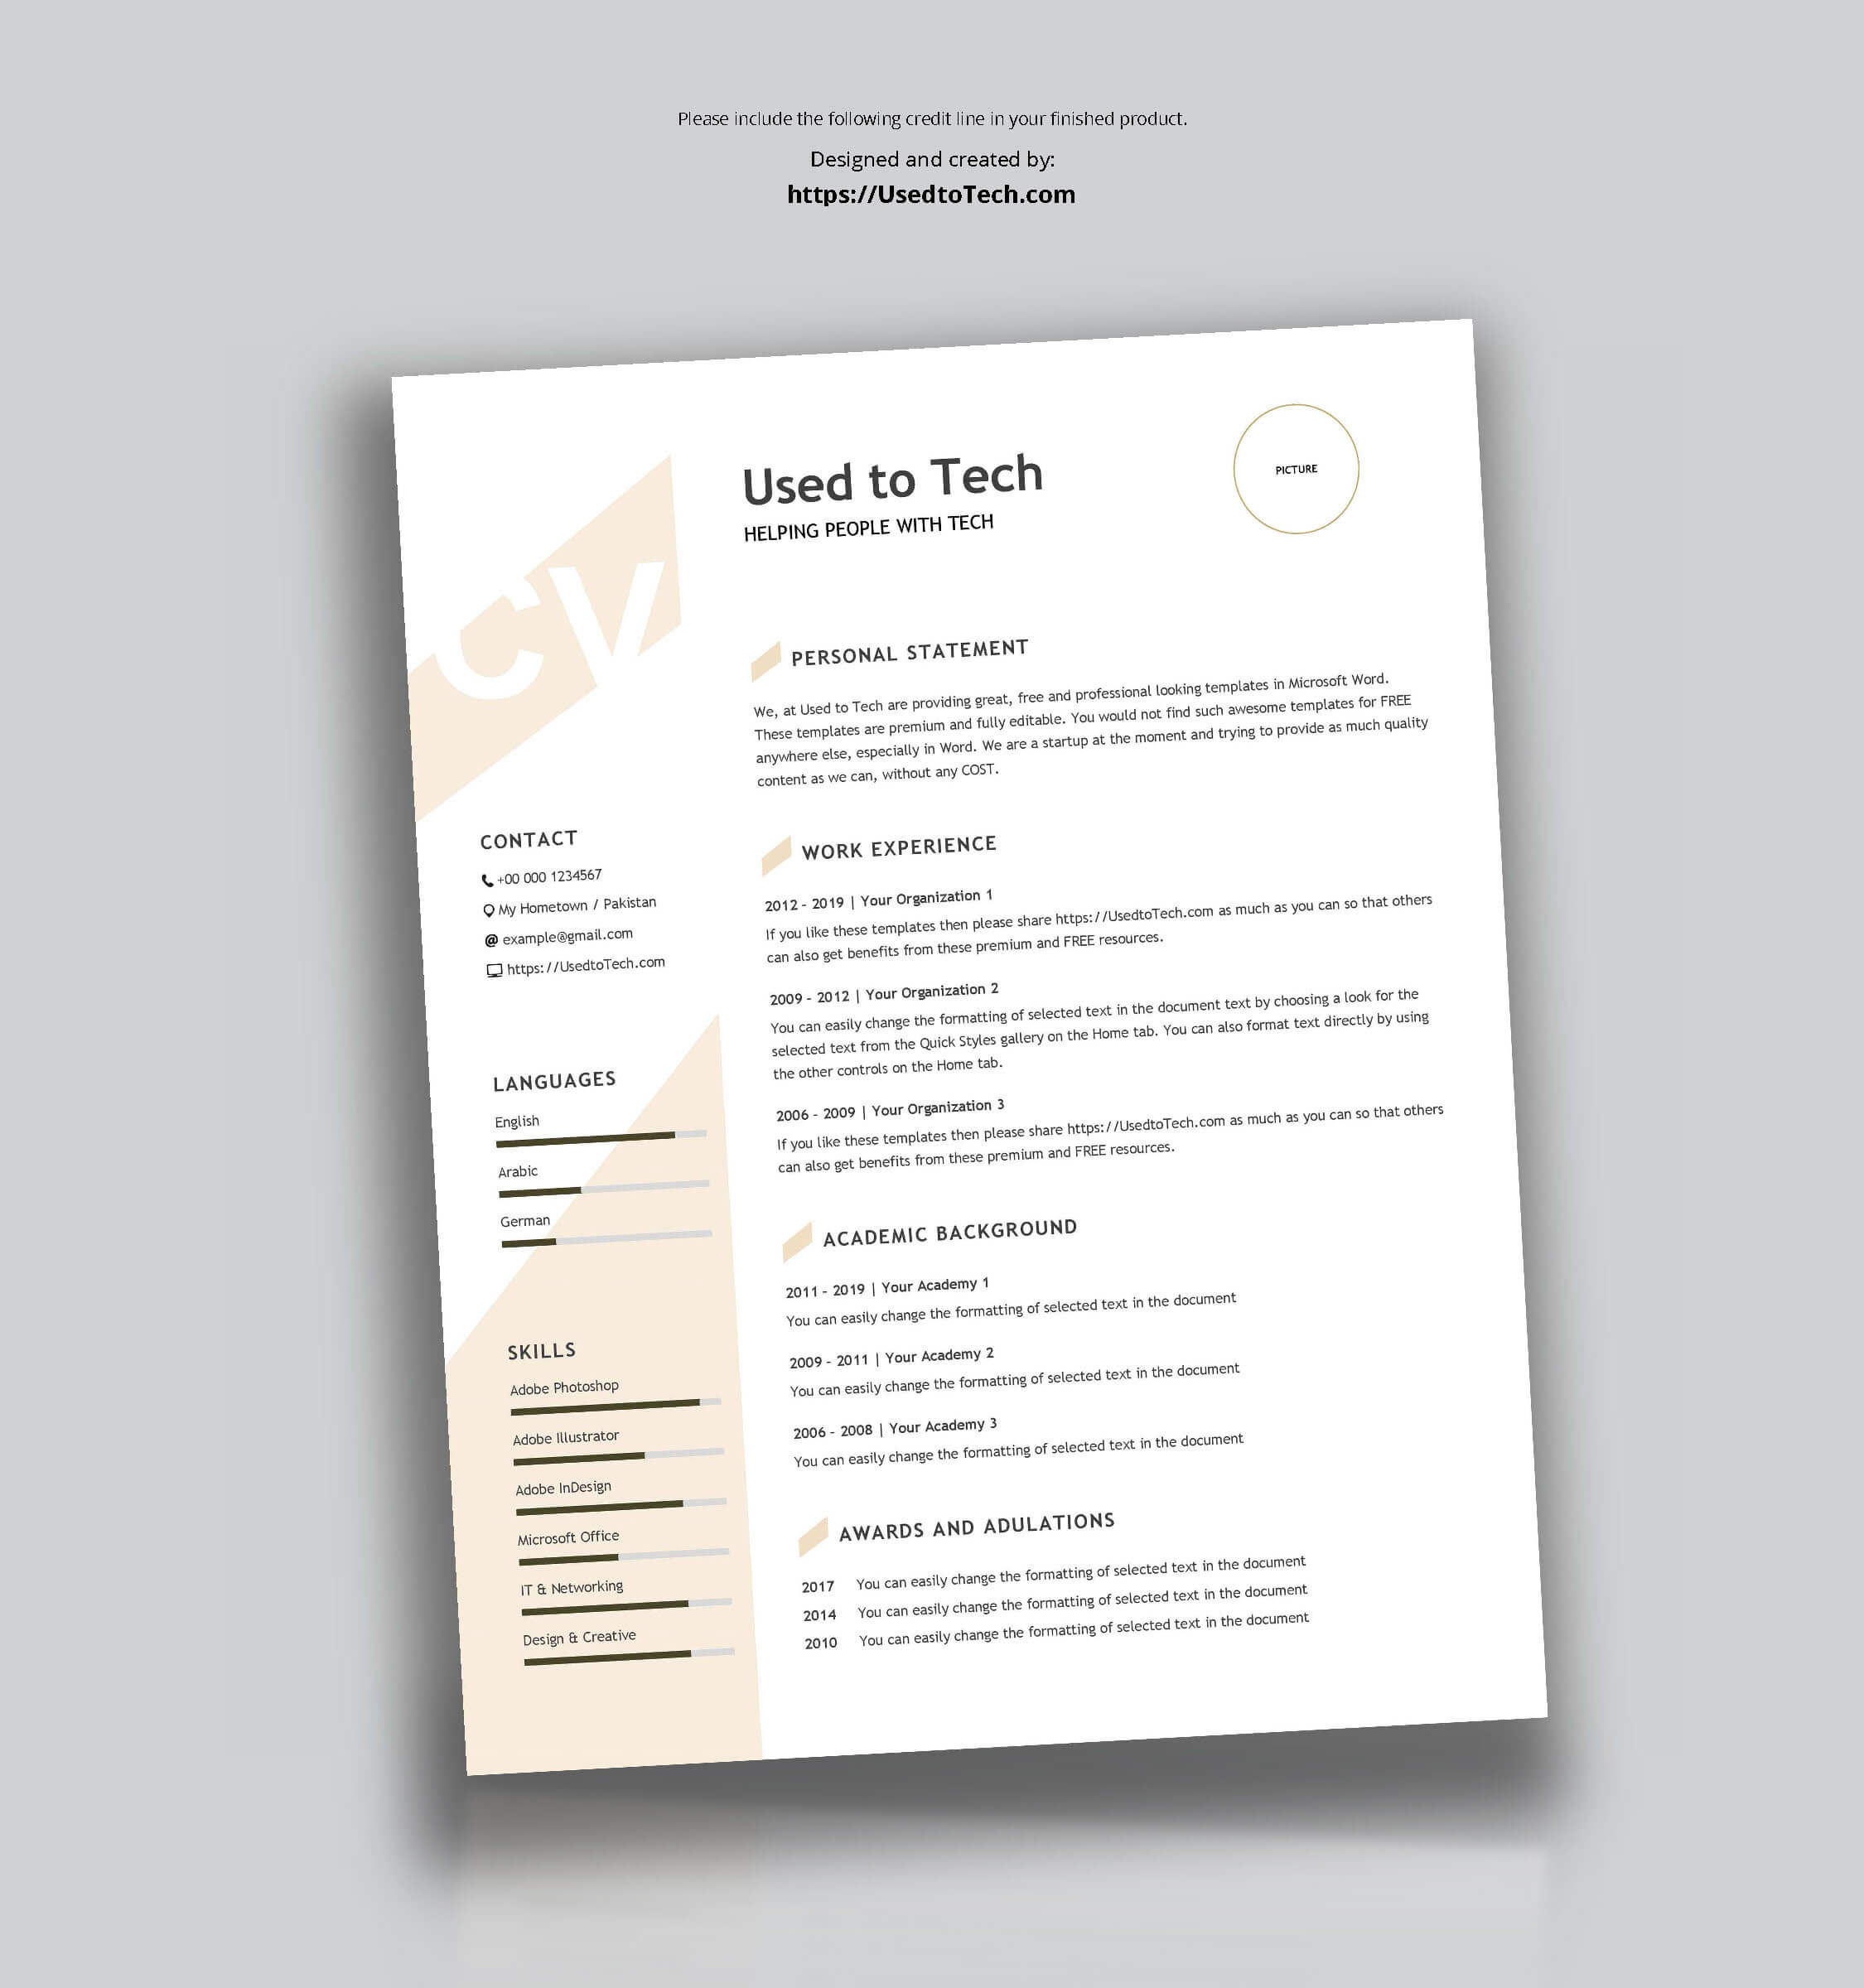 Modern Resume Template In Word Free - Used To Tech Within How To Find A Resume Template On Word